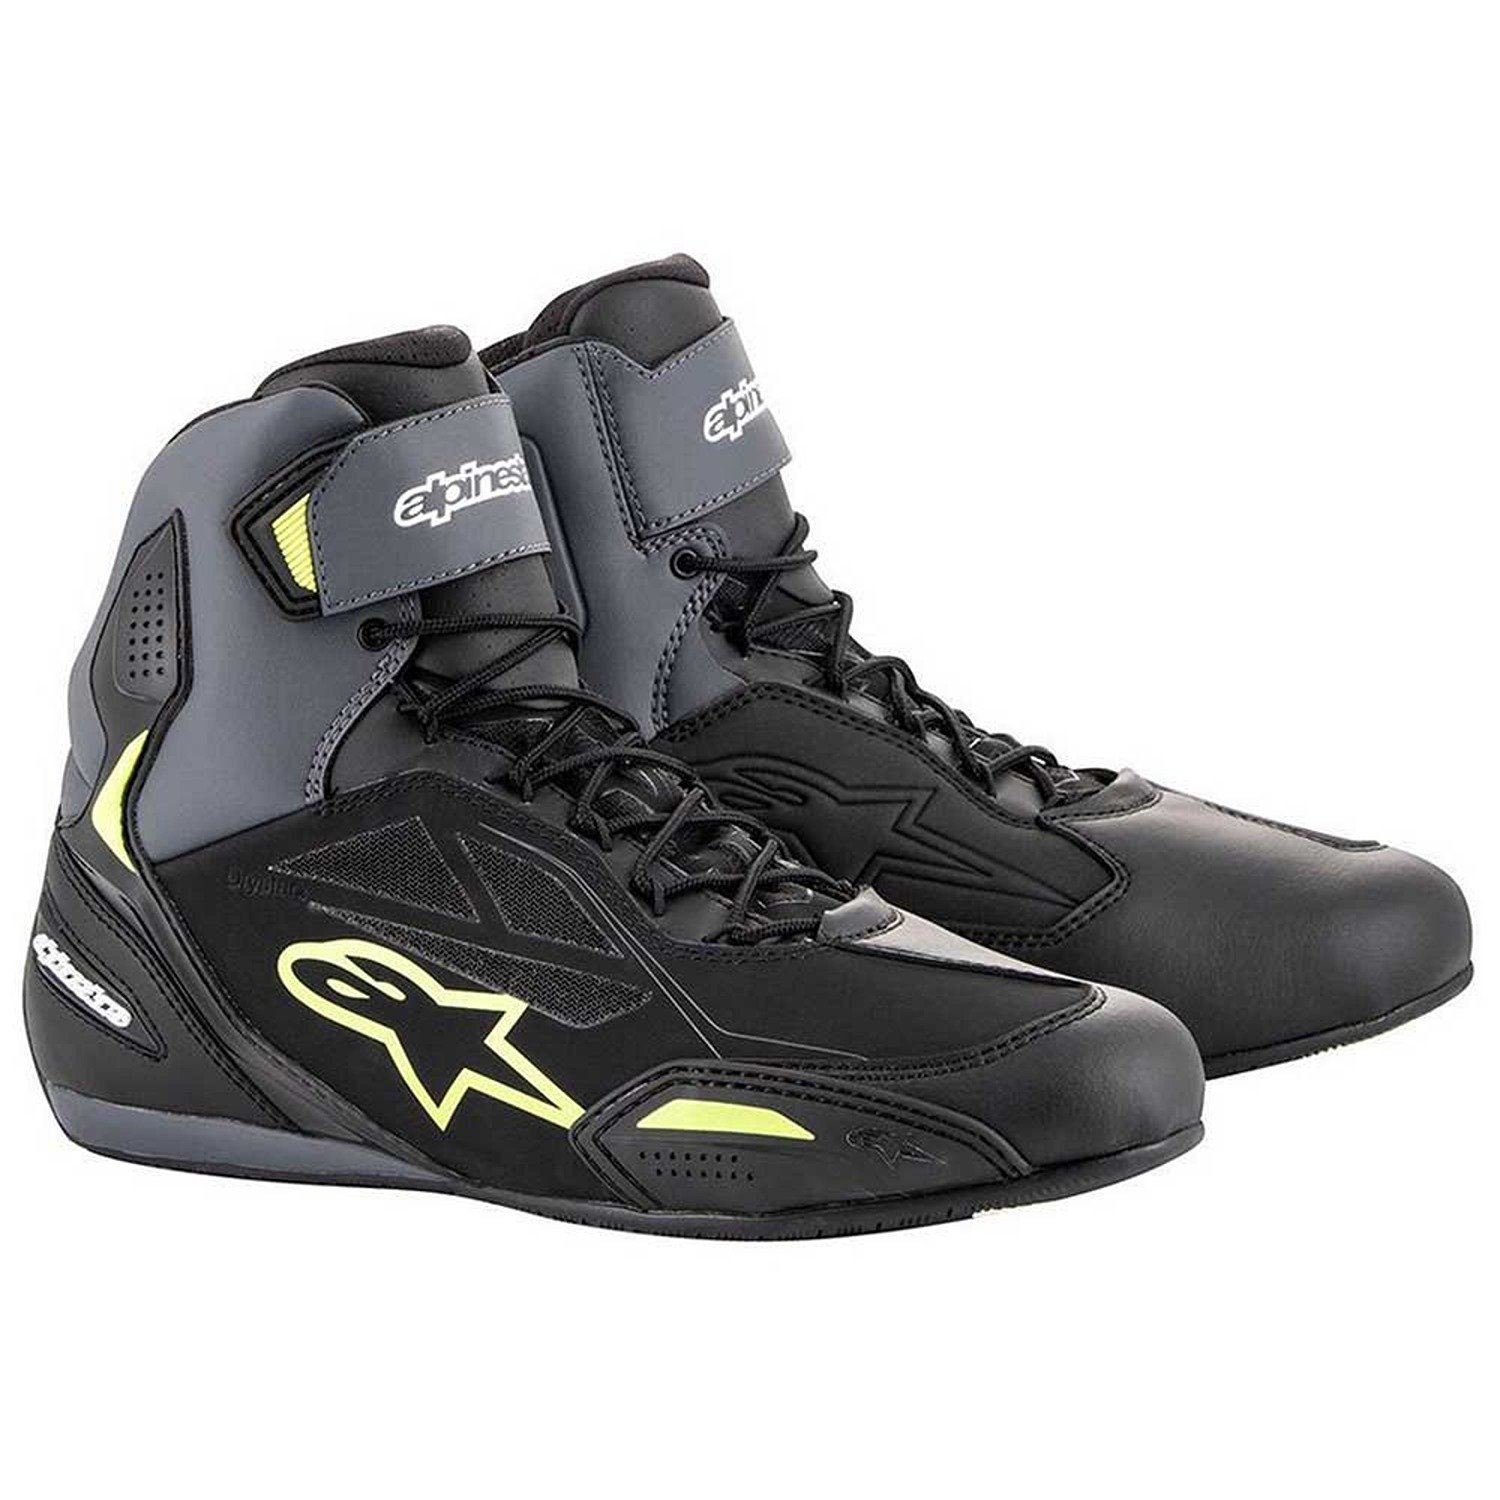 Image of EU Alpinestars Faster-3 Shoes Black Yellow Fluo Taille US 7